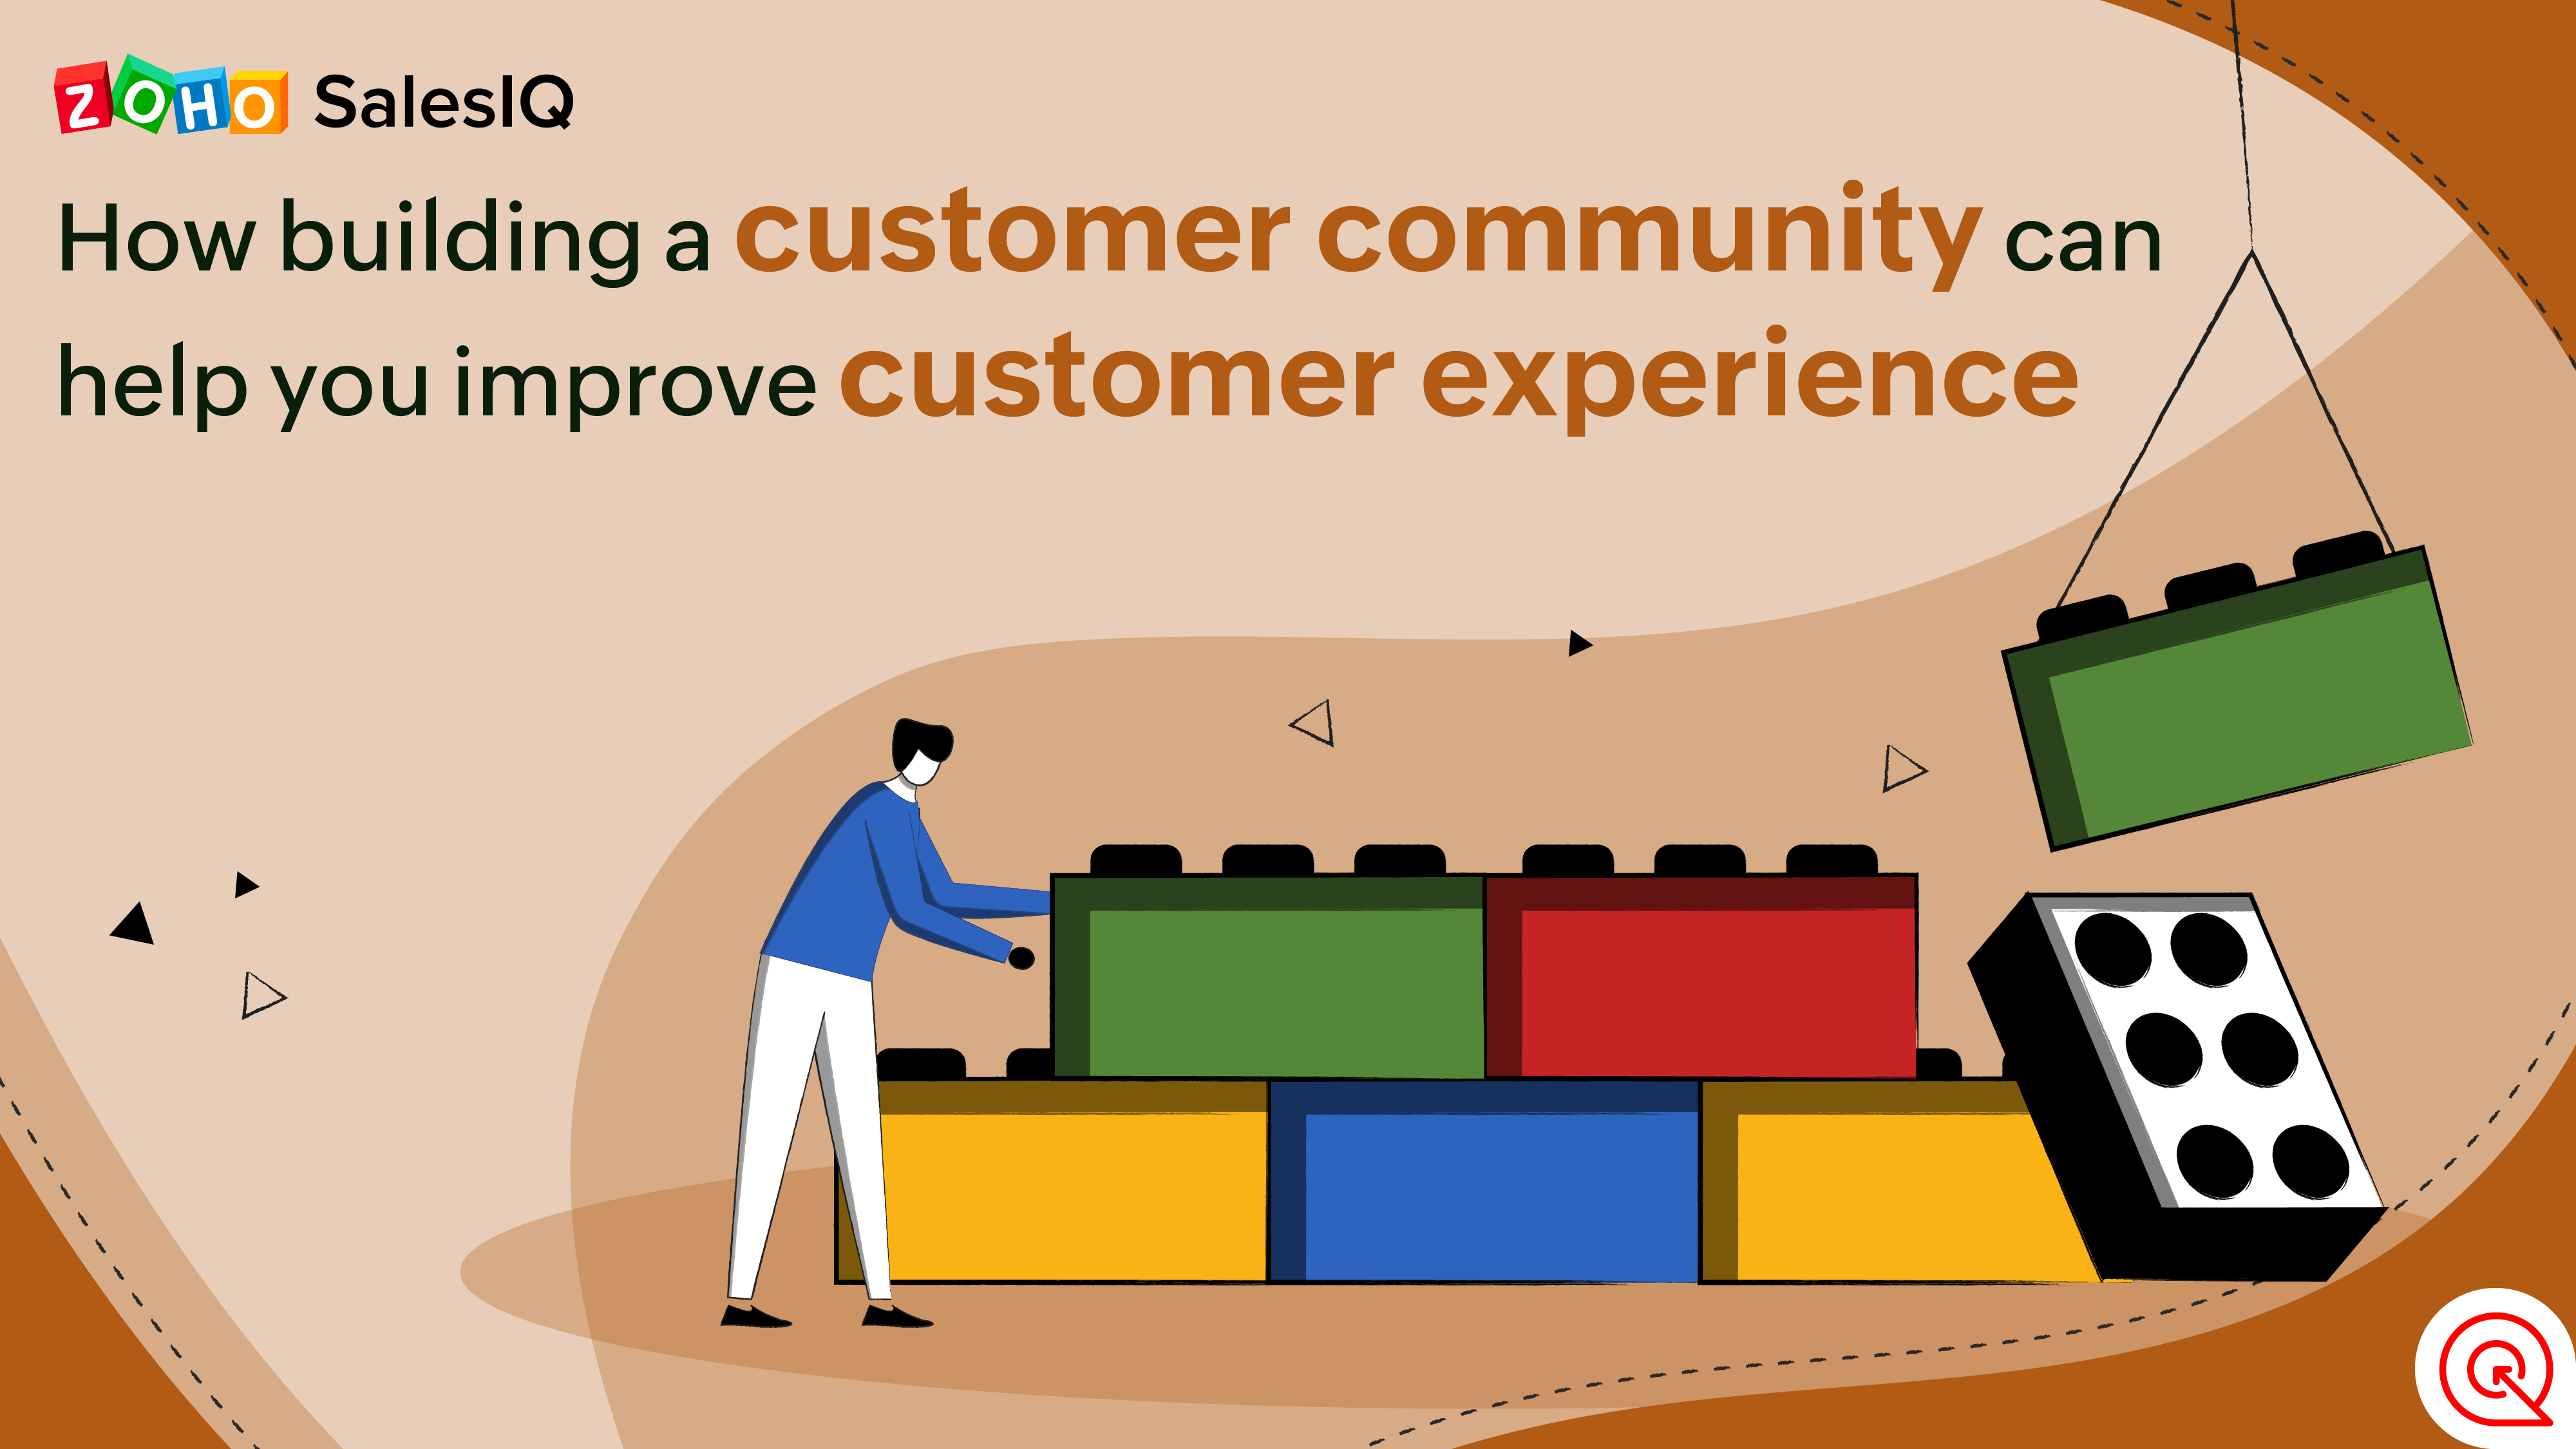 What is customer community and how does it improve customer experience?